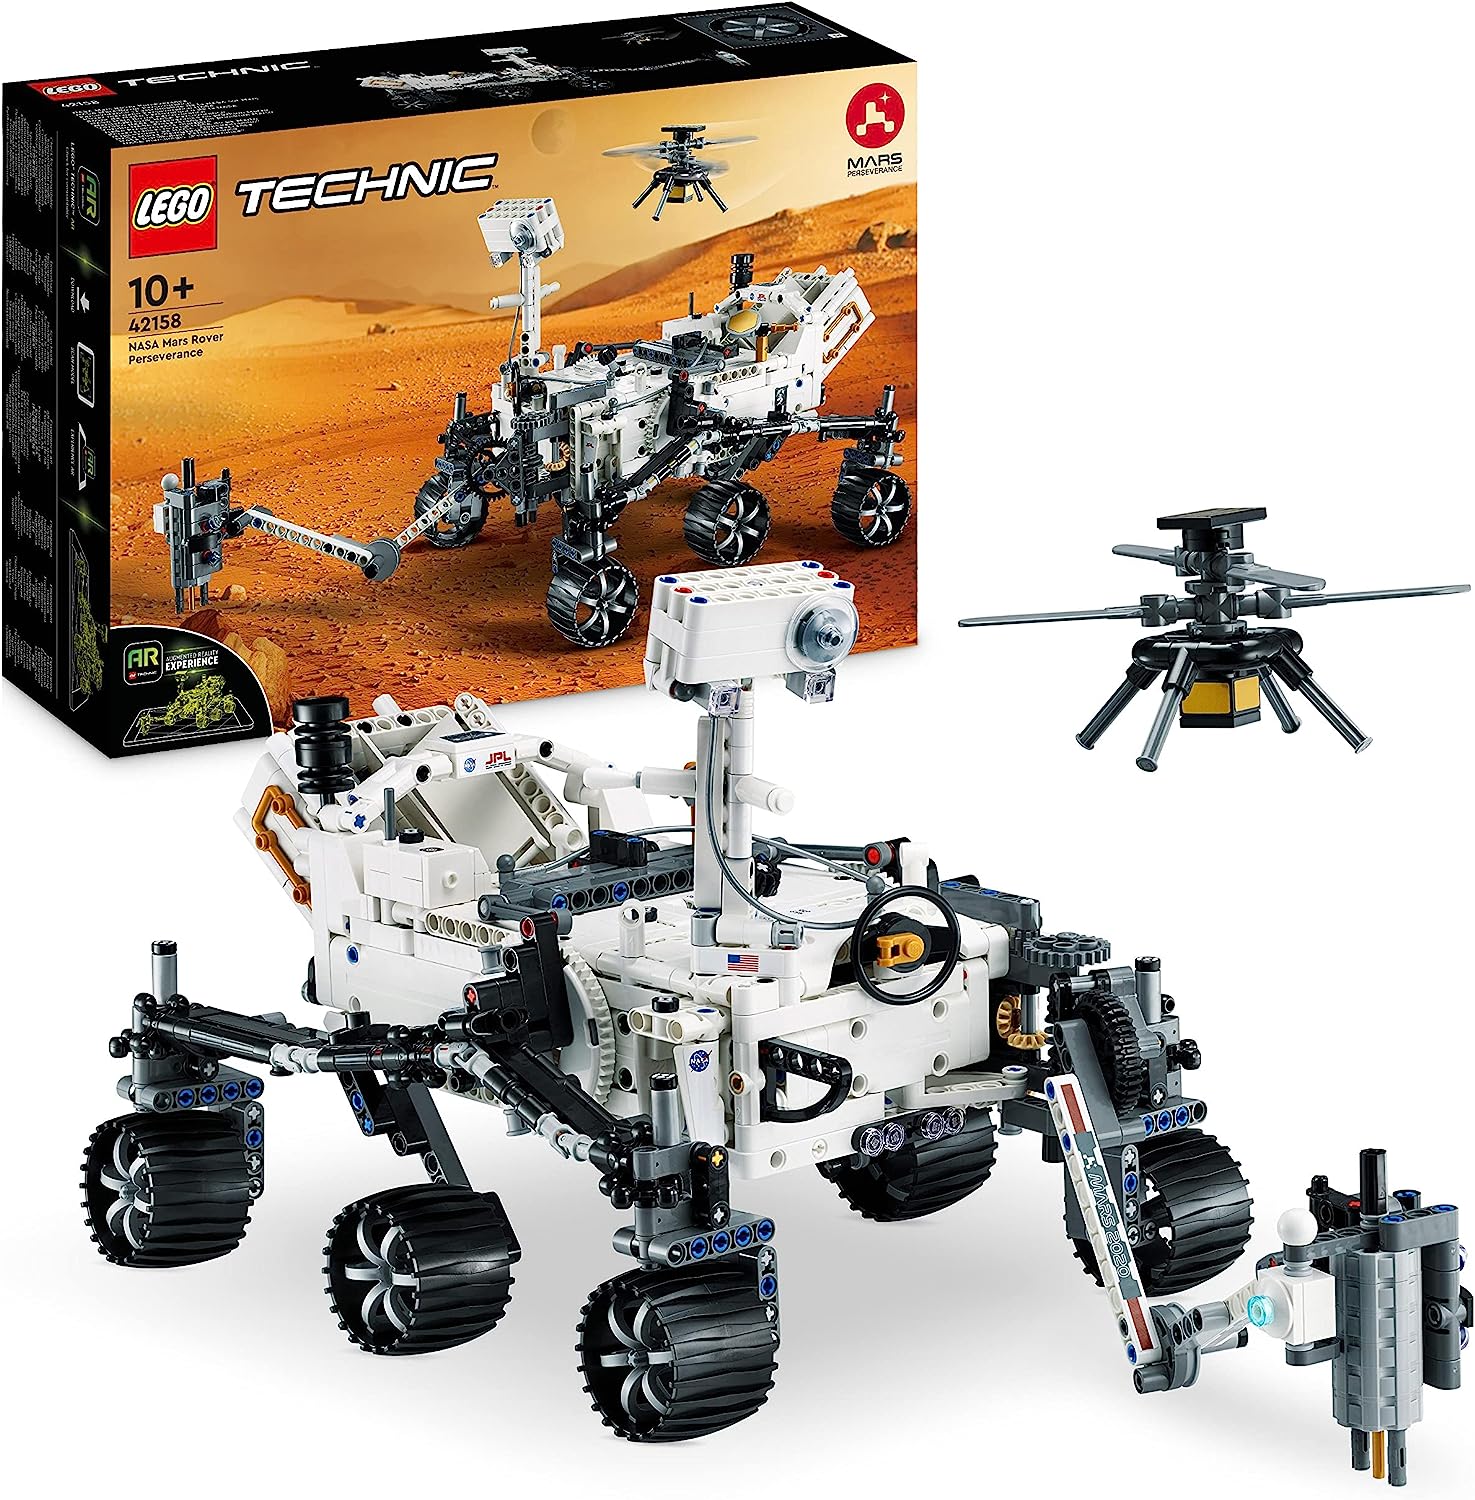 LEGO 42158 Technic NASA MARS-ROVER PERSERVANCE Space Toy Set With AR App, Science Toy for Building for Girls and Boys From 10 Years